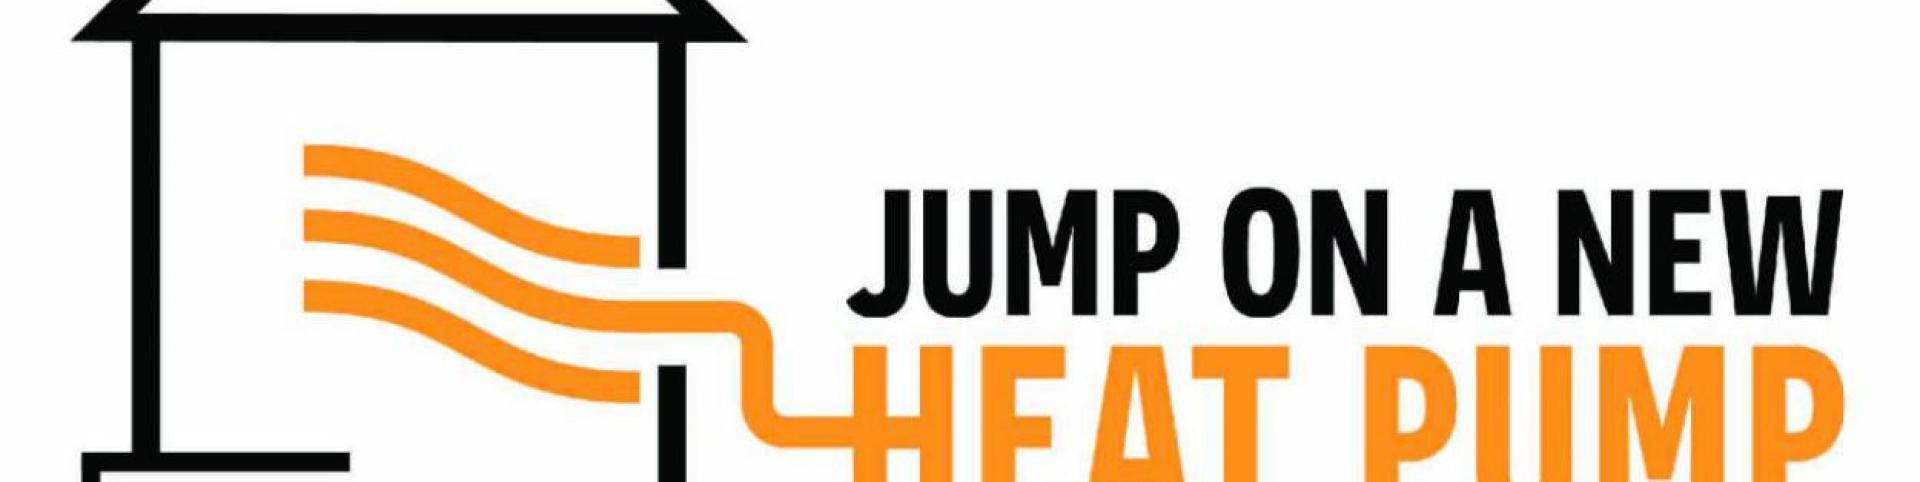 Graphic with words "Jump on a new Heat Pump" written on it.